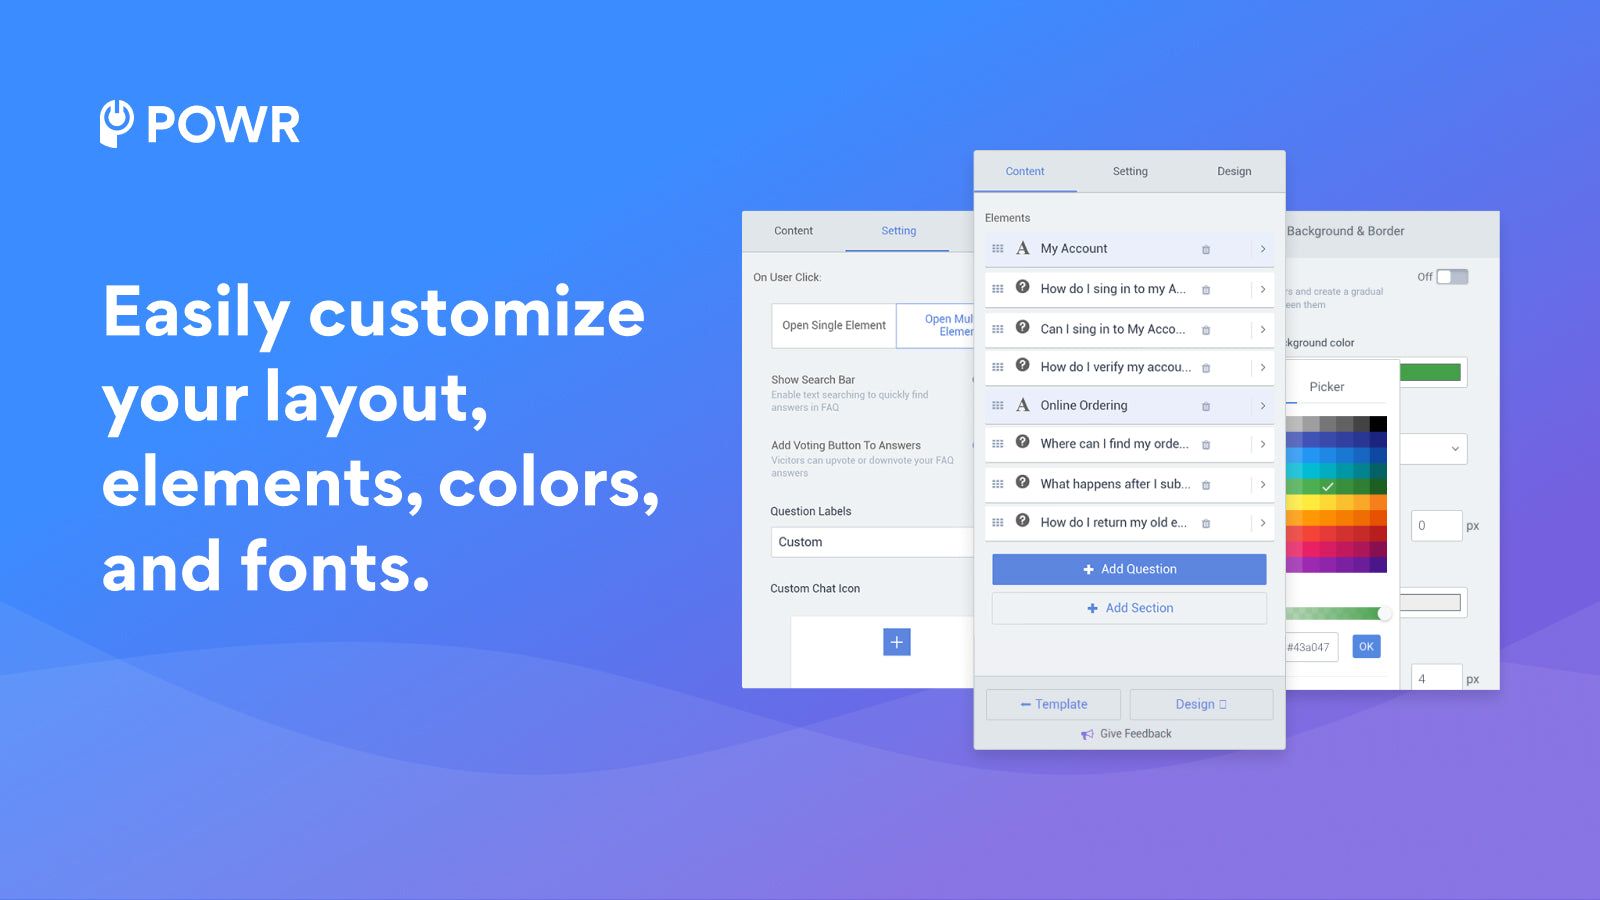 Easily customize your layout, elements, colors, and fonts.